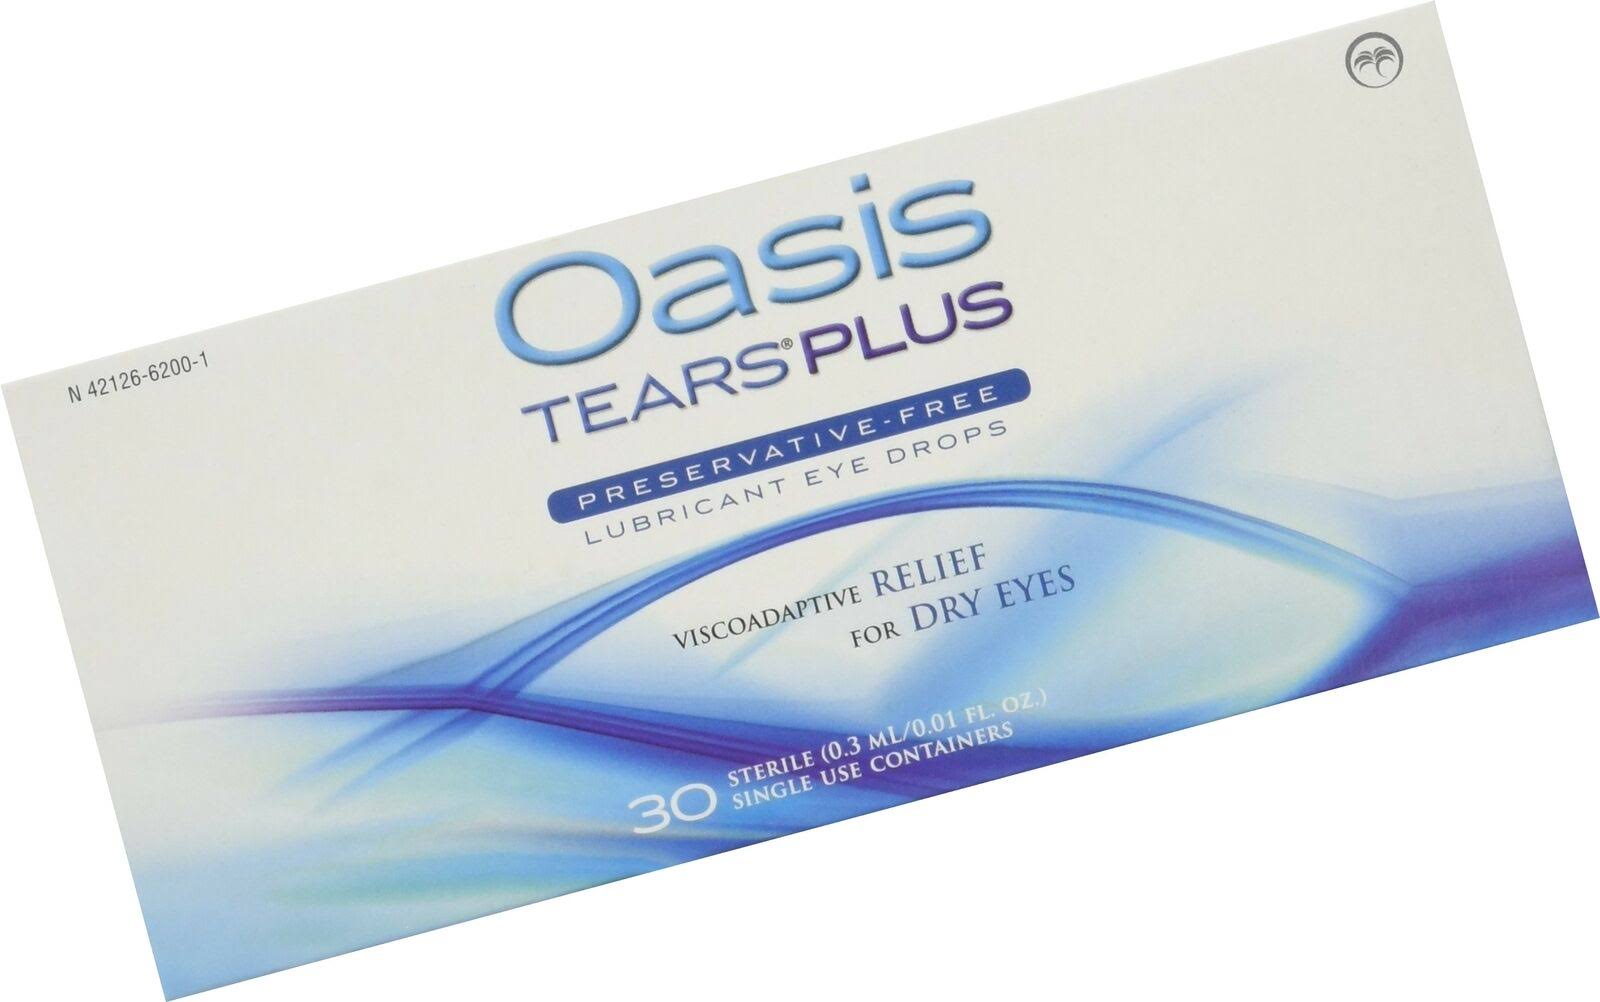 Oasis TEARS PLUS Preservative-Free Lubricant Eye Drops, 30 Containers, 0.3 ML/001 FL OZ